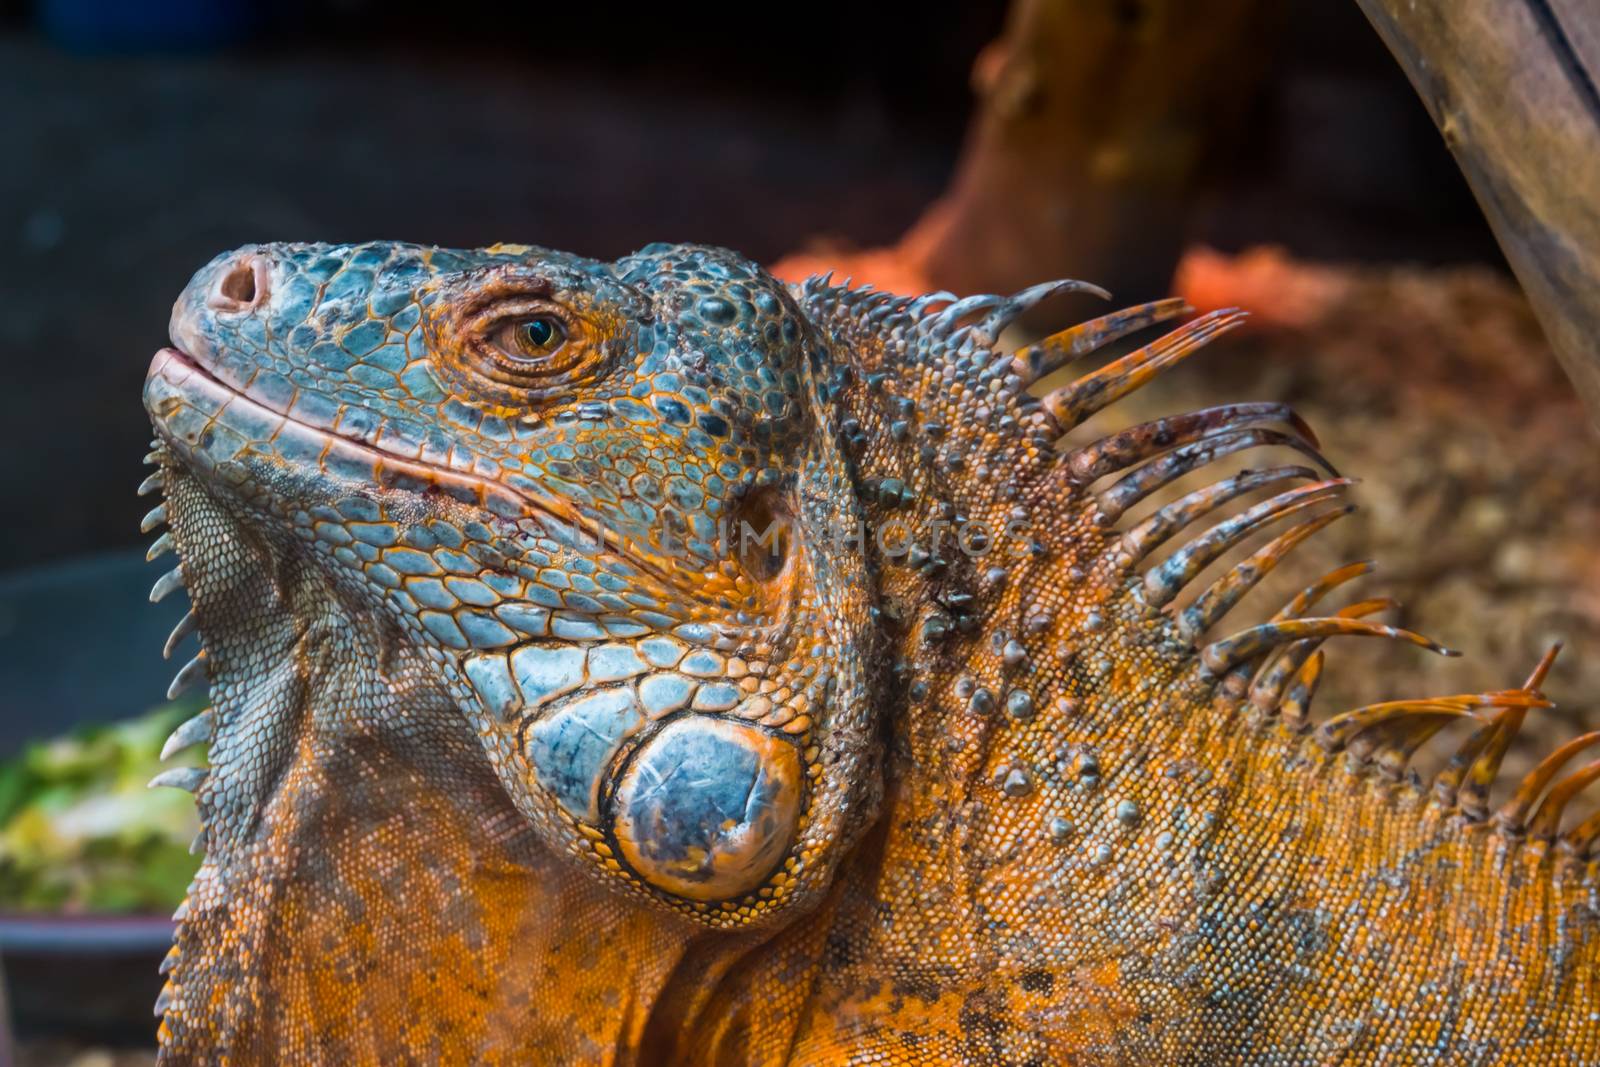 The face of an American green iguana in closeup, Detailed reptile head, tropical lizard specie from America, popular exotic pet by charlottebleijenberg